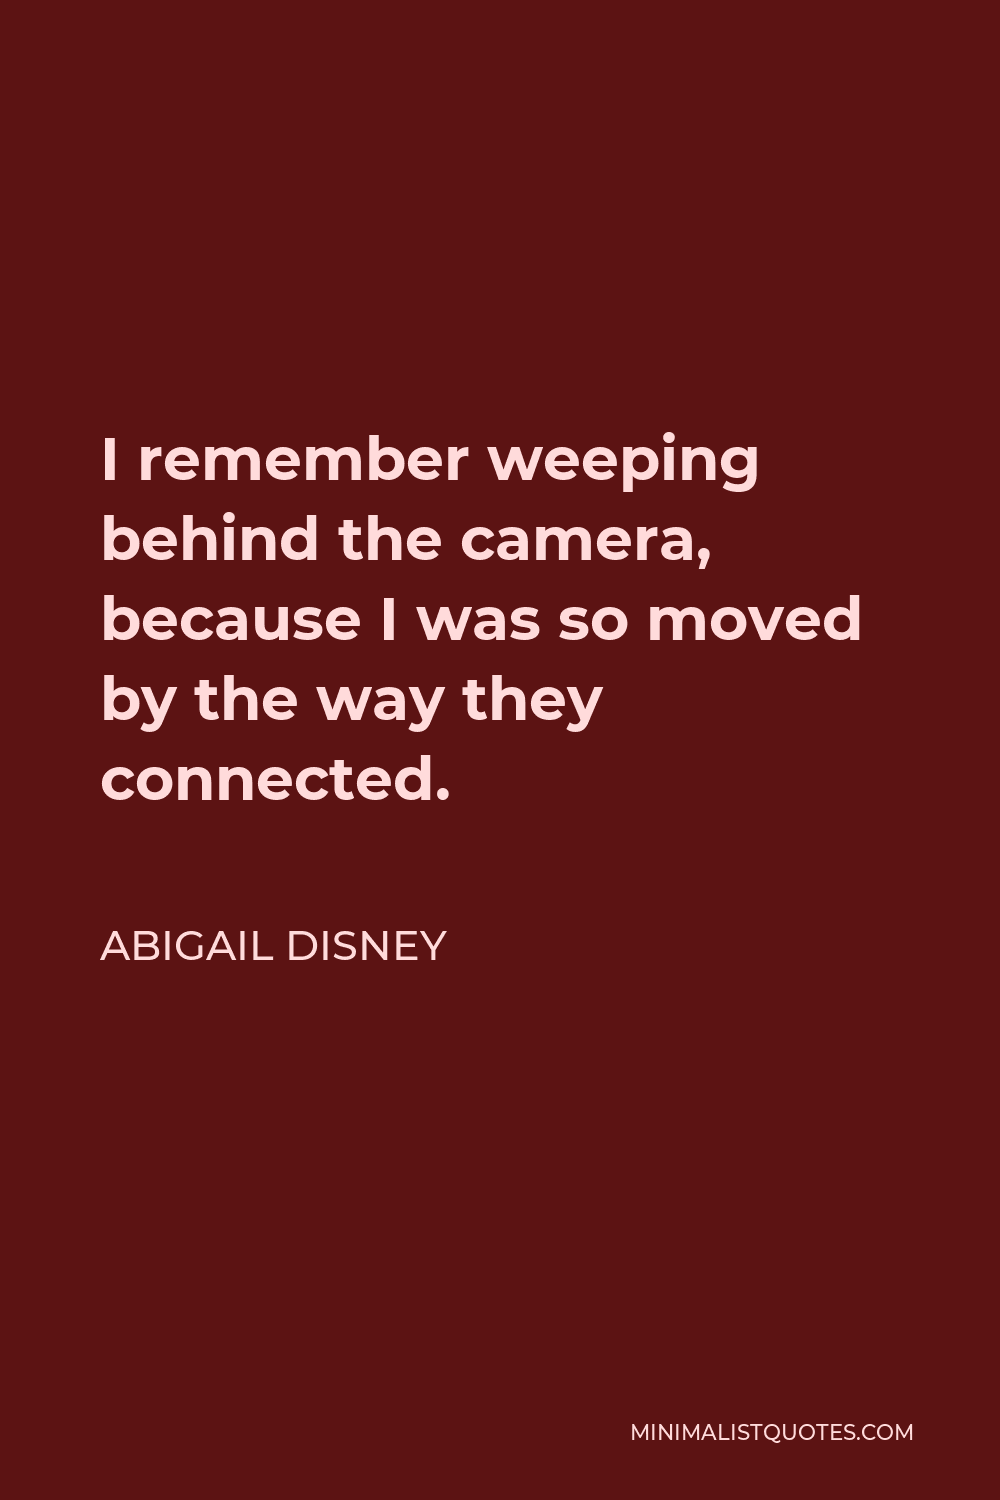 Abigail Disney Quote - I remember weeping behind the camera, because I was so moved by the way they connected.